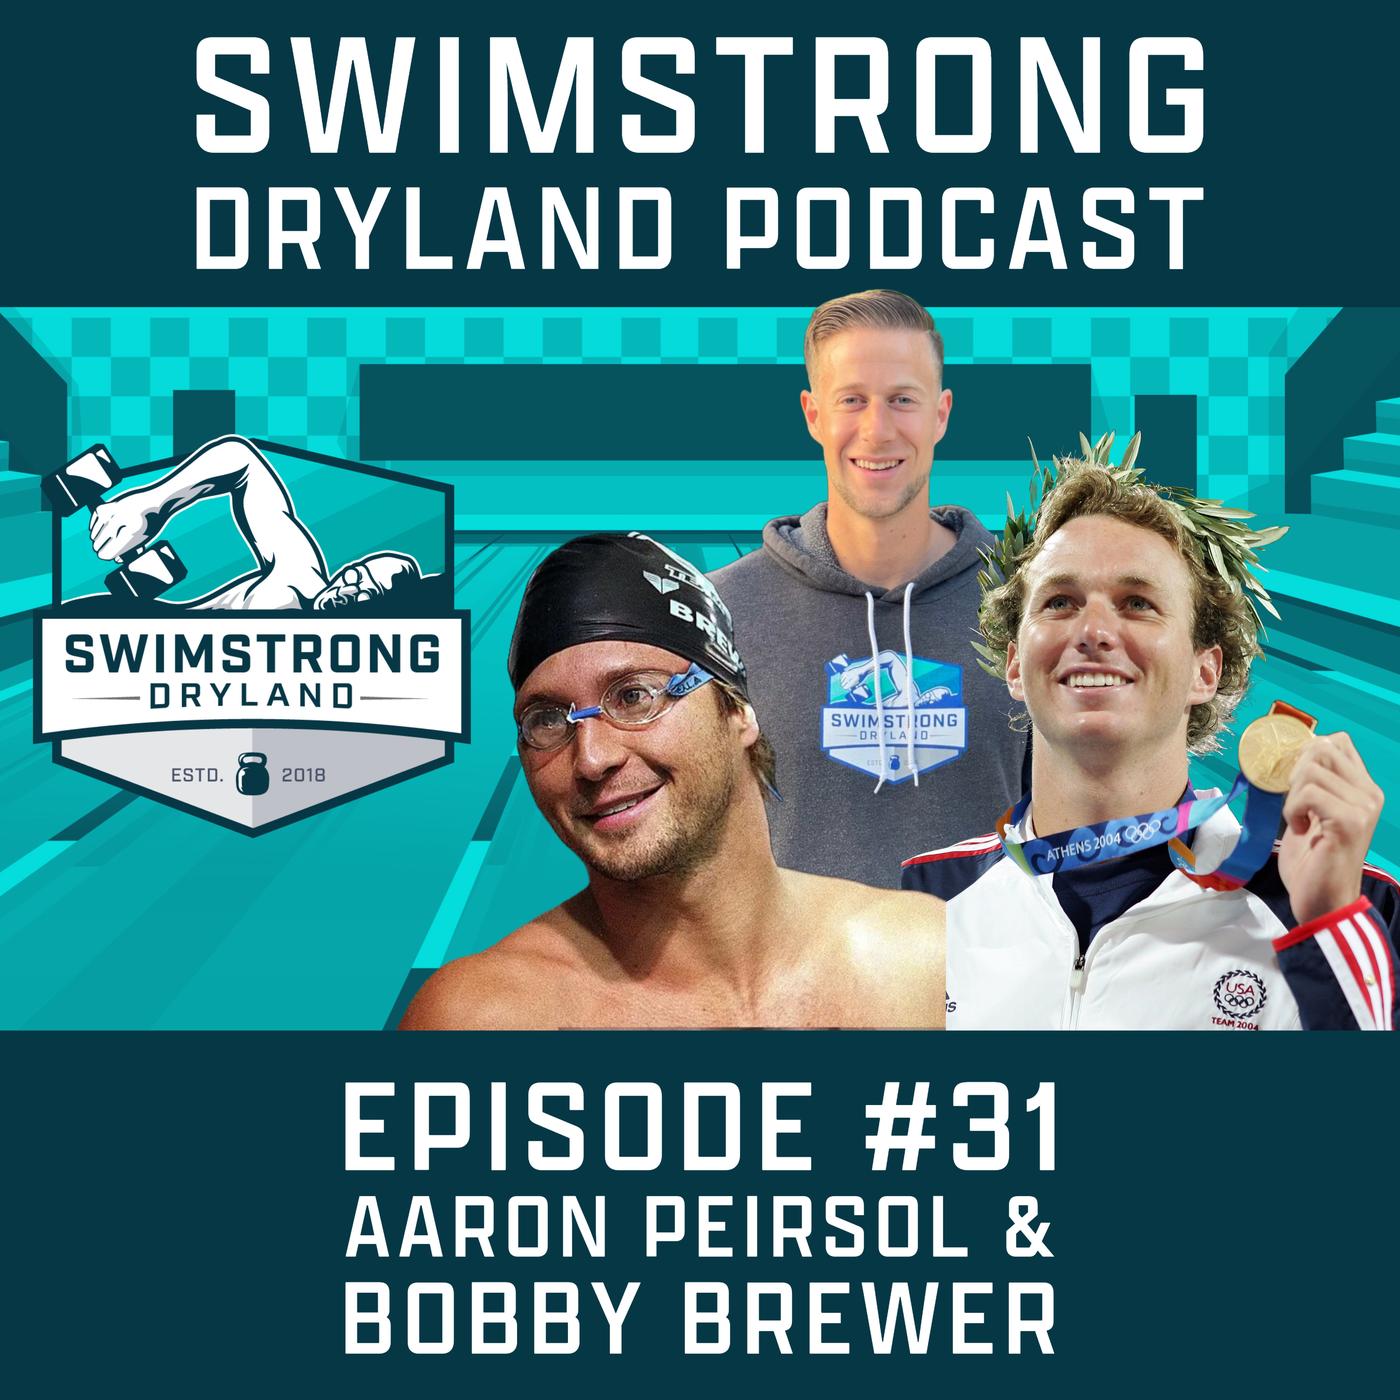 Episode 31: Aaron Peirsol & Bobby Brewer - SwimStrong Dryland Podcast ...